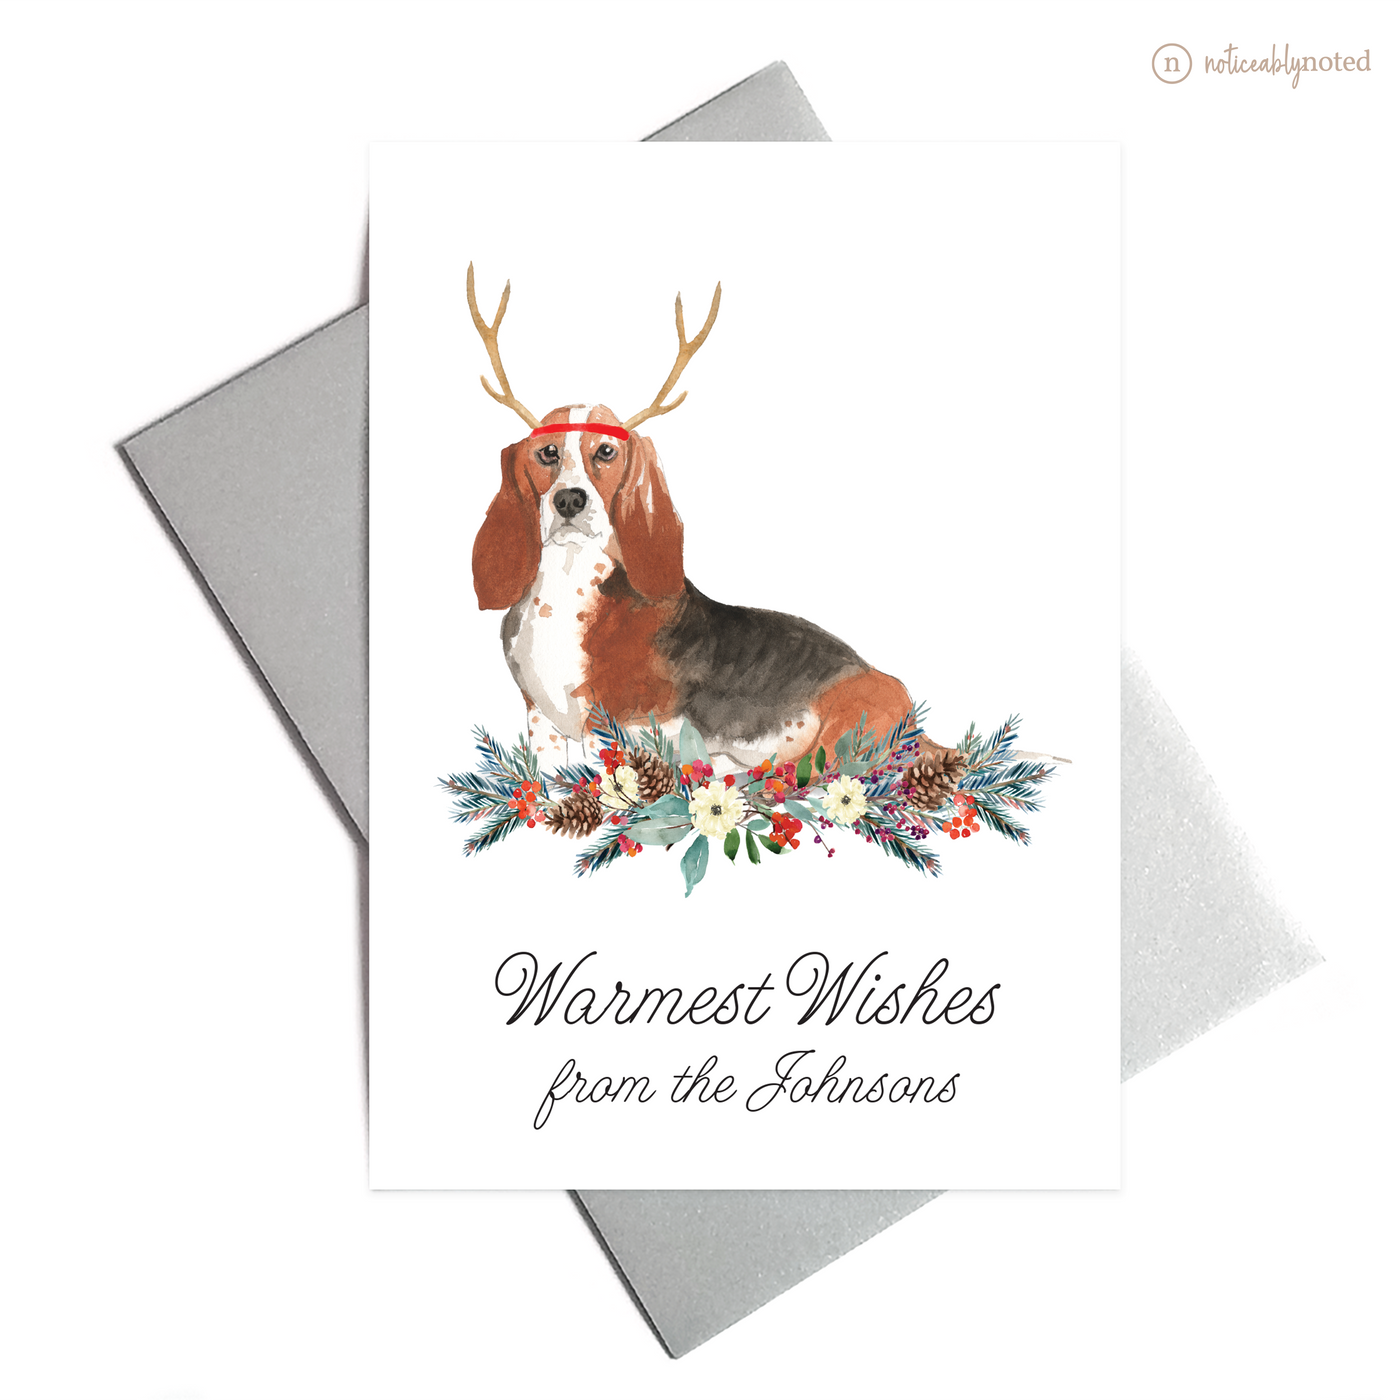 Basset Hound Dog Holiday Greeting Cards | Noticeably Noted